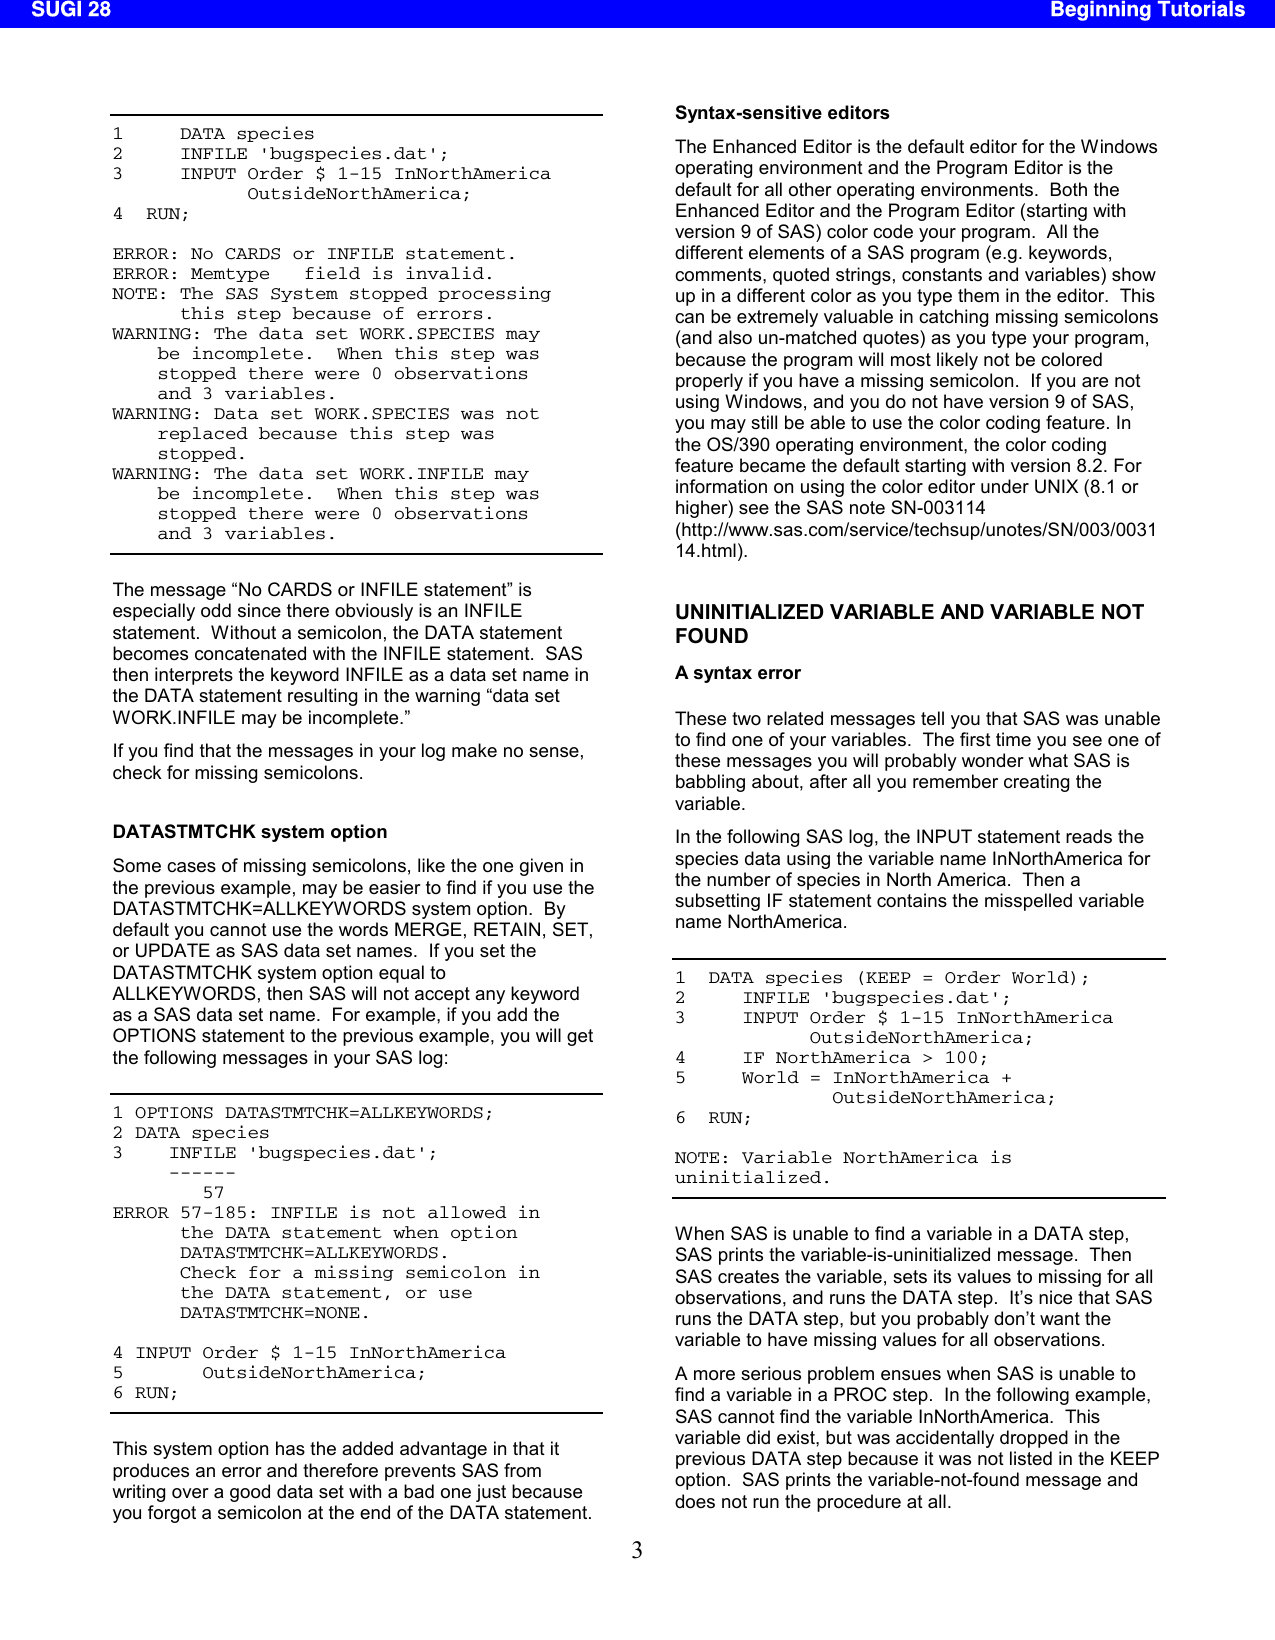 Page 3 of 10 - SUGI 28: Errors, Warnings, And Notes (Oh My): A Practical Guide To Debugging SAS(r) Programs